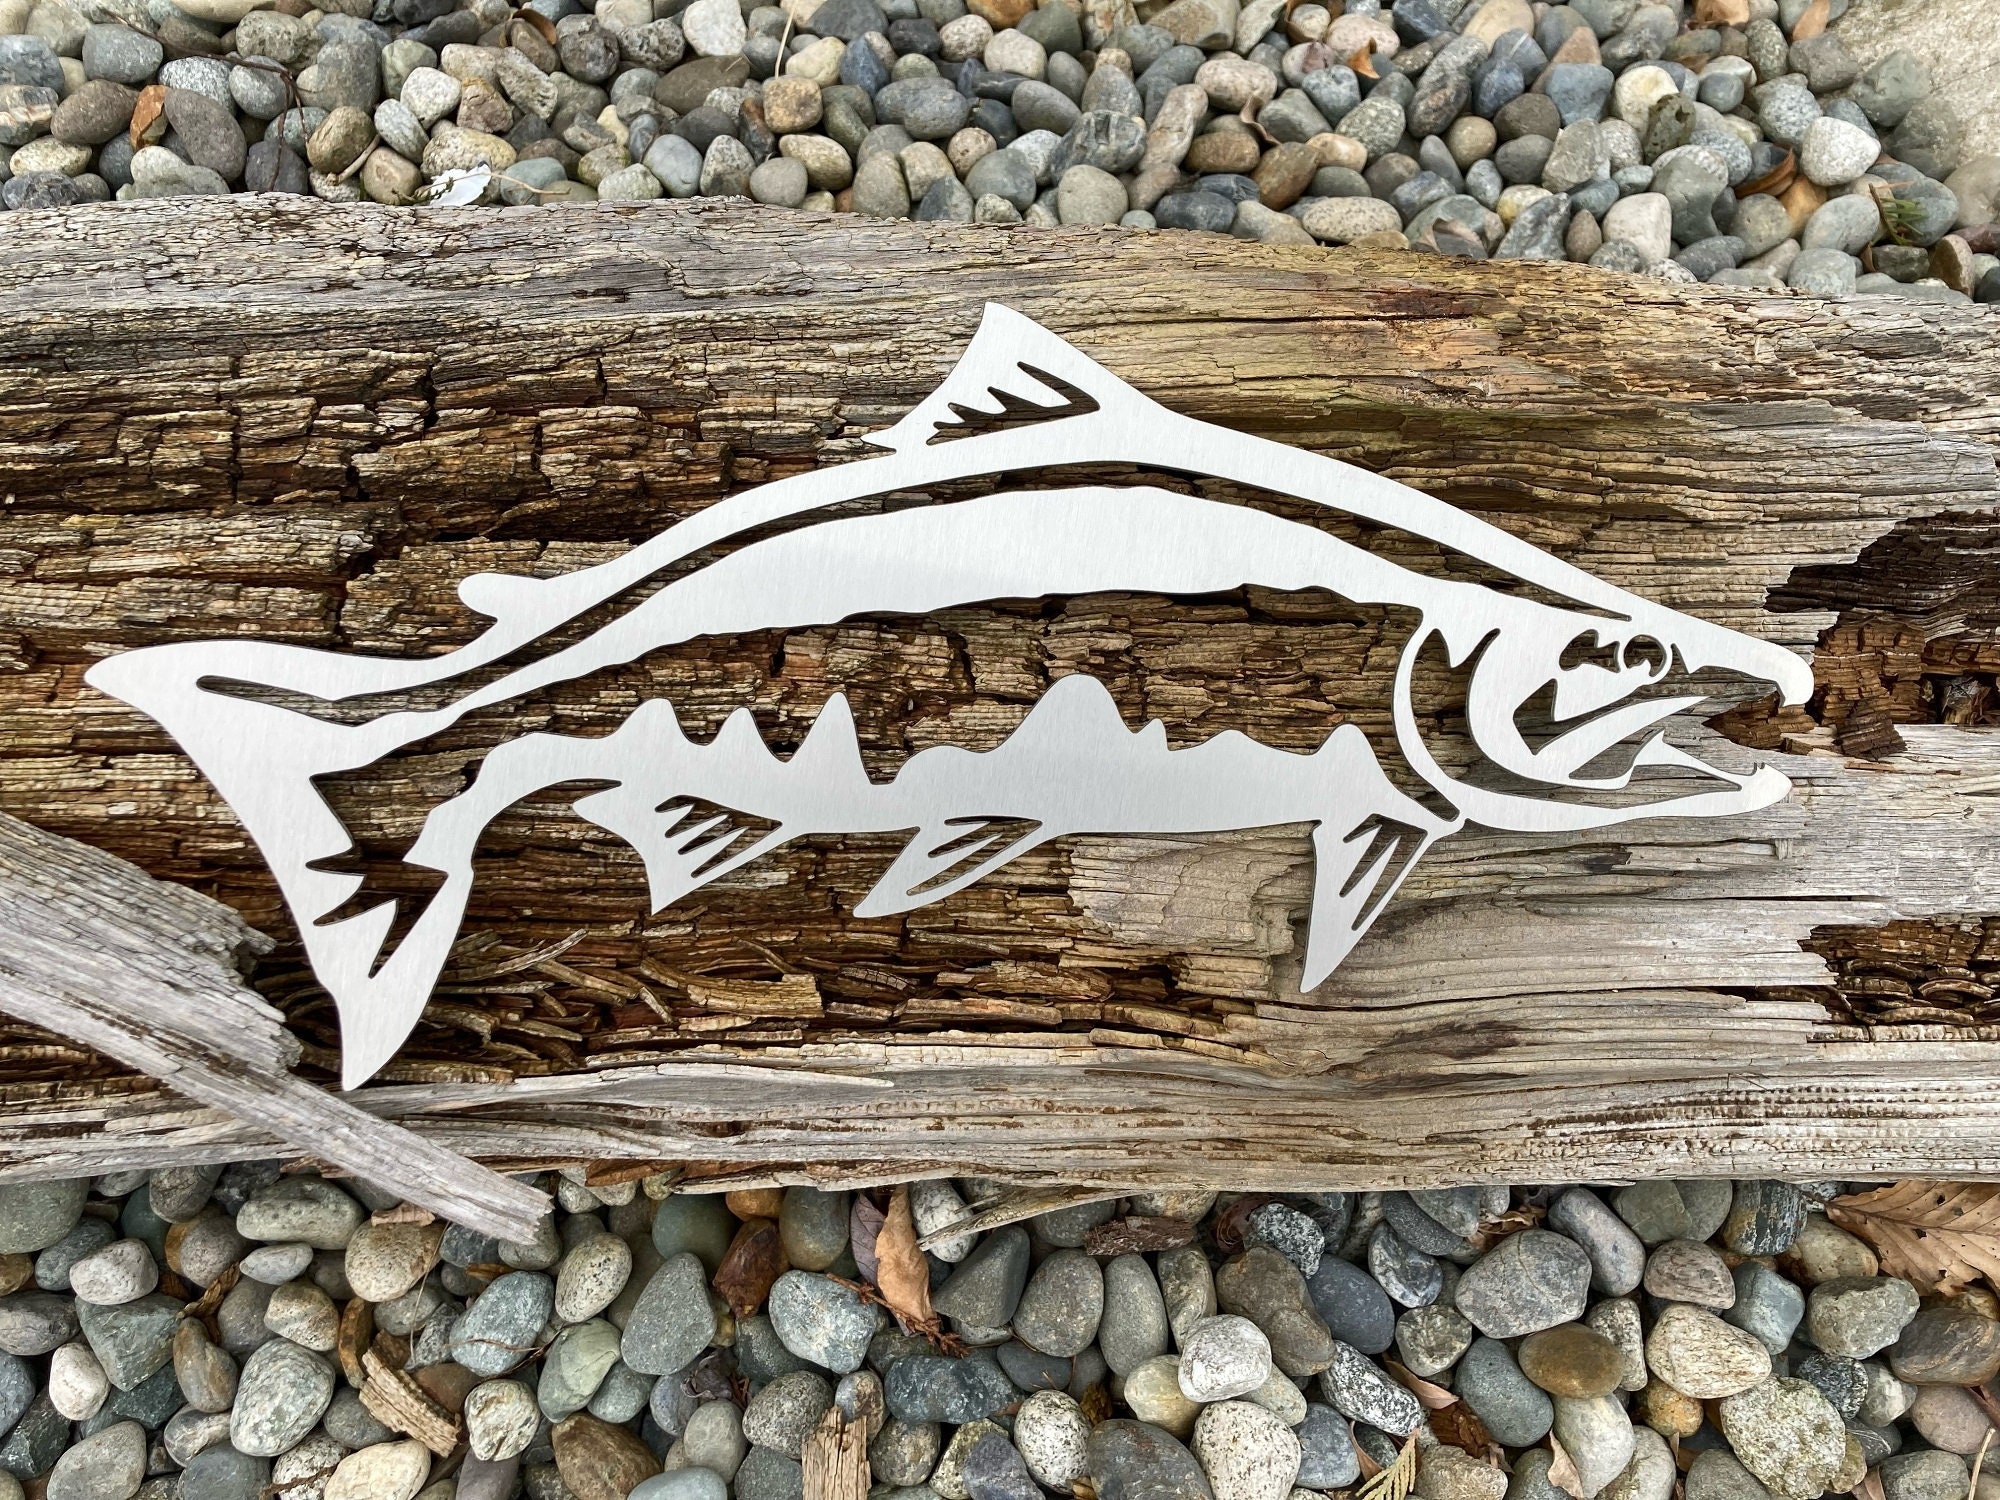 Fly Fishing Decor | Fishing Decor for Home | Metal Wall Art - Fish Wall  Decor Ornament Trout Fishing Scene Metal Wall Artwork Home Office  Decoration